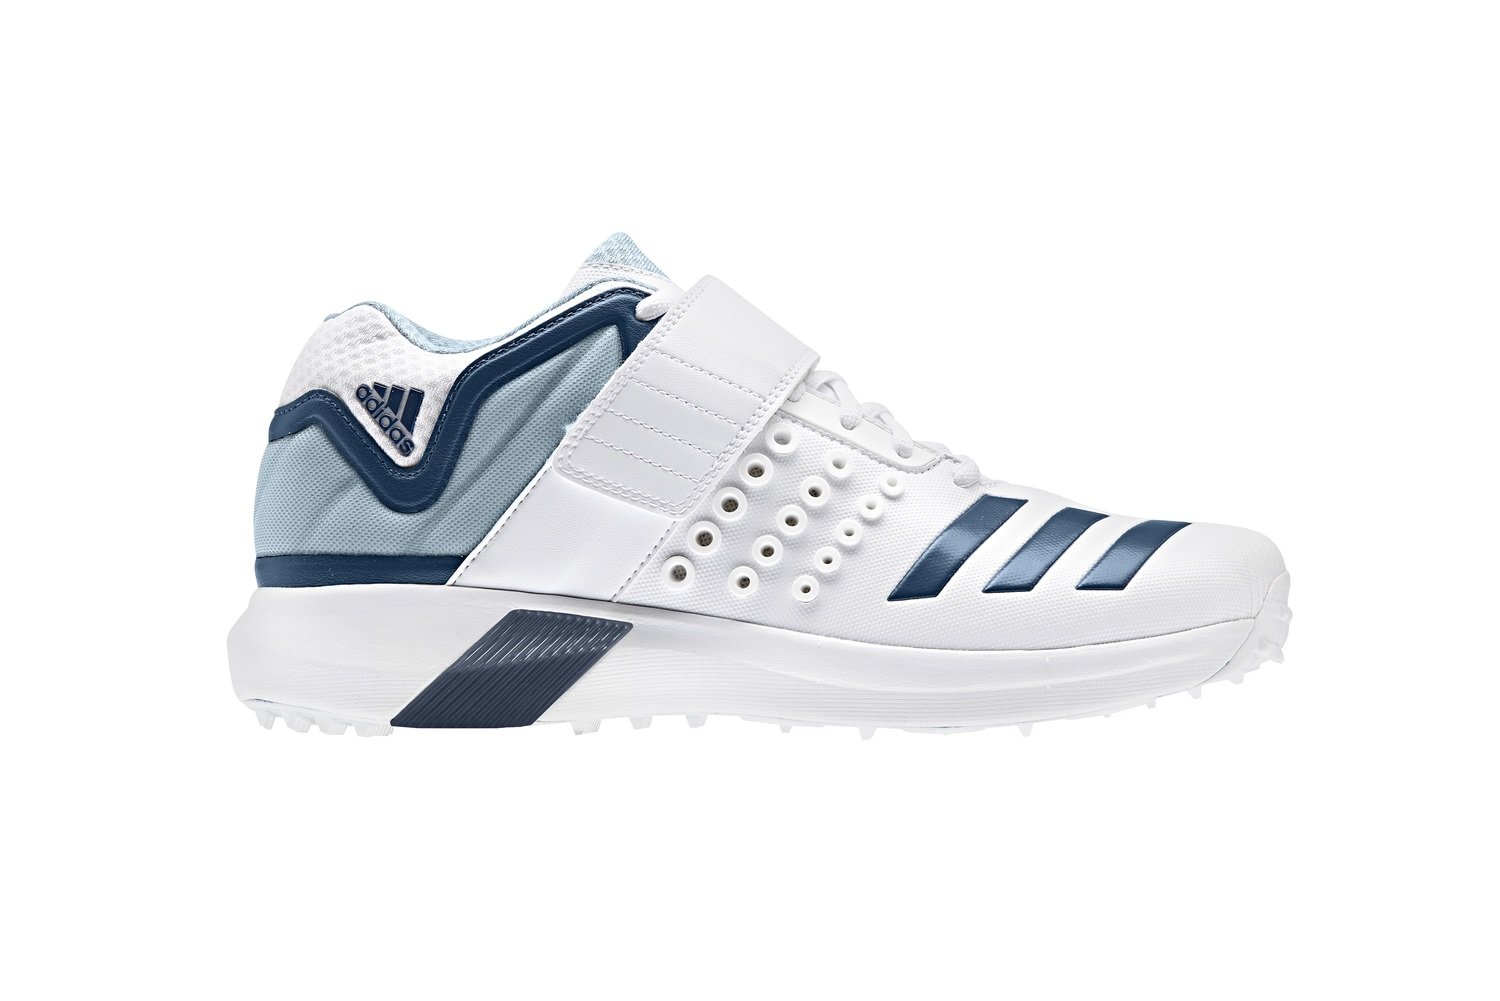 2019 adidas Vector Mid Spike Cricket Shoes